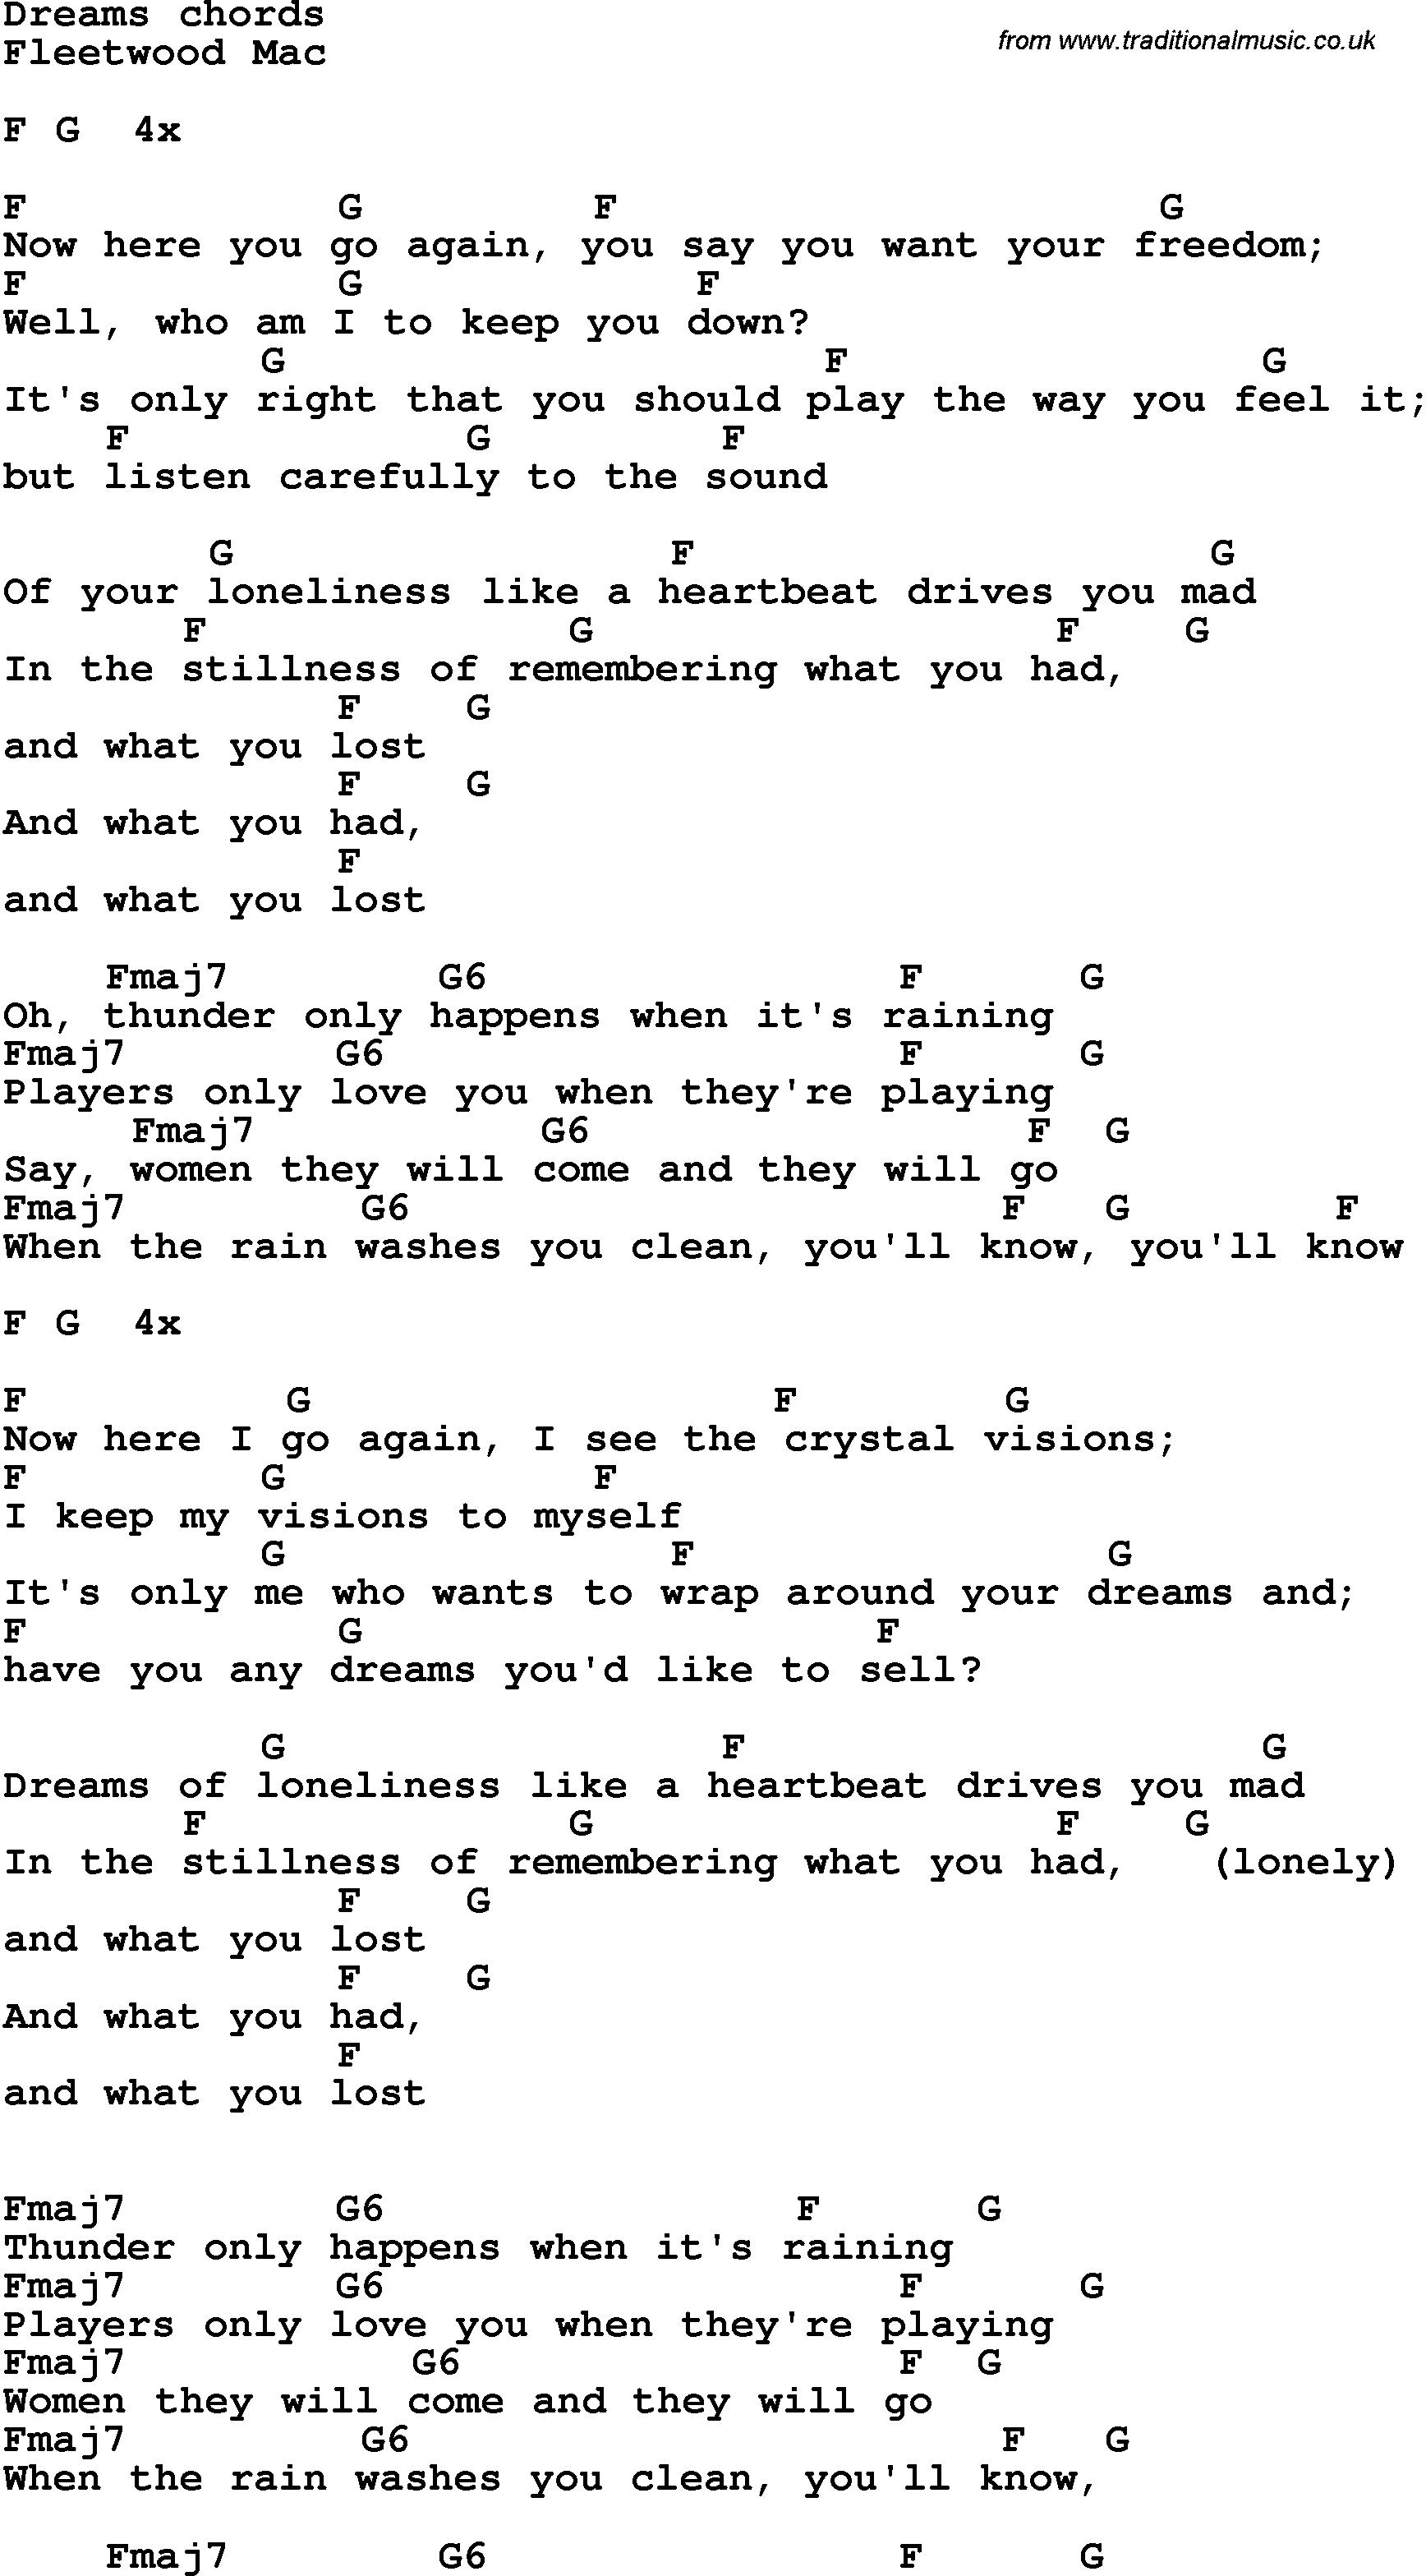 Song Lyrics with guitar chords for Dreams